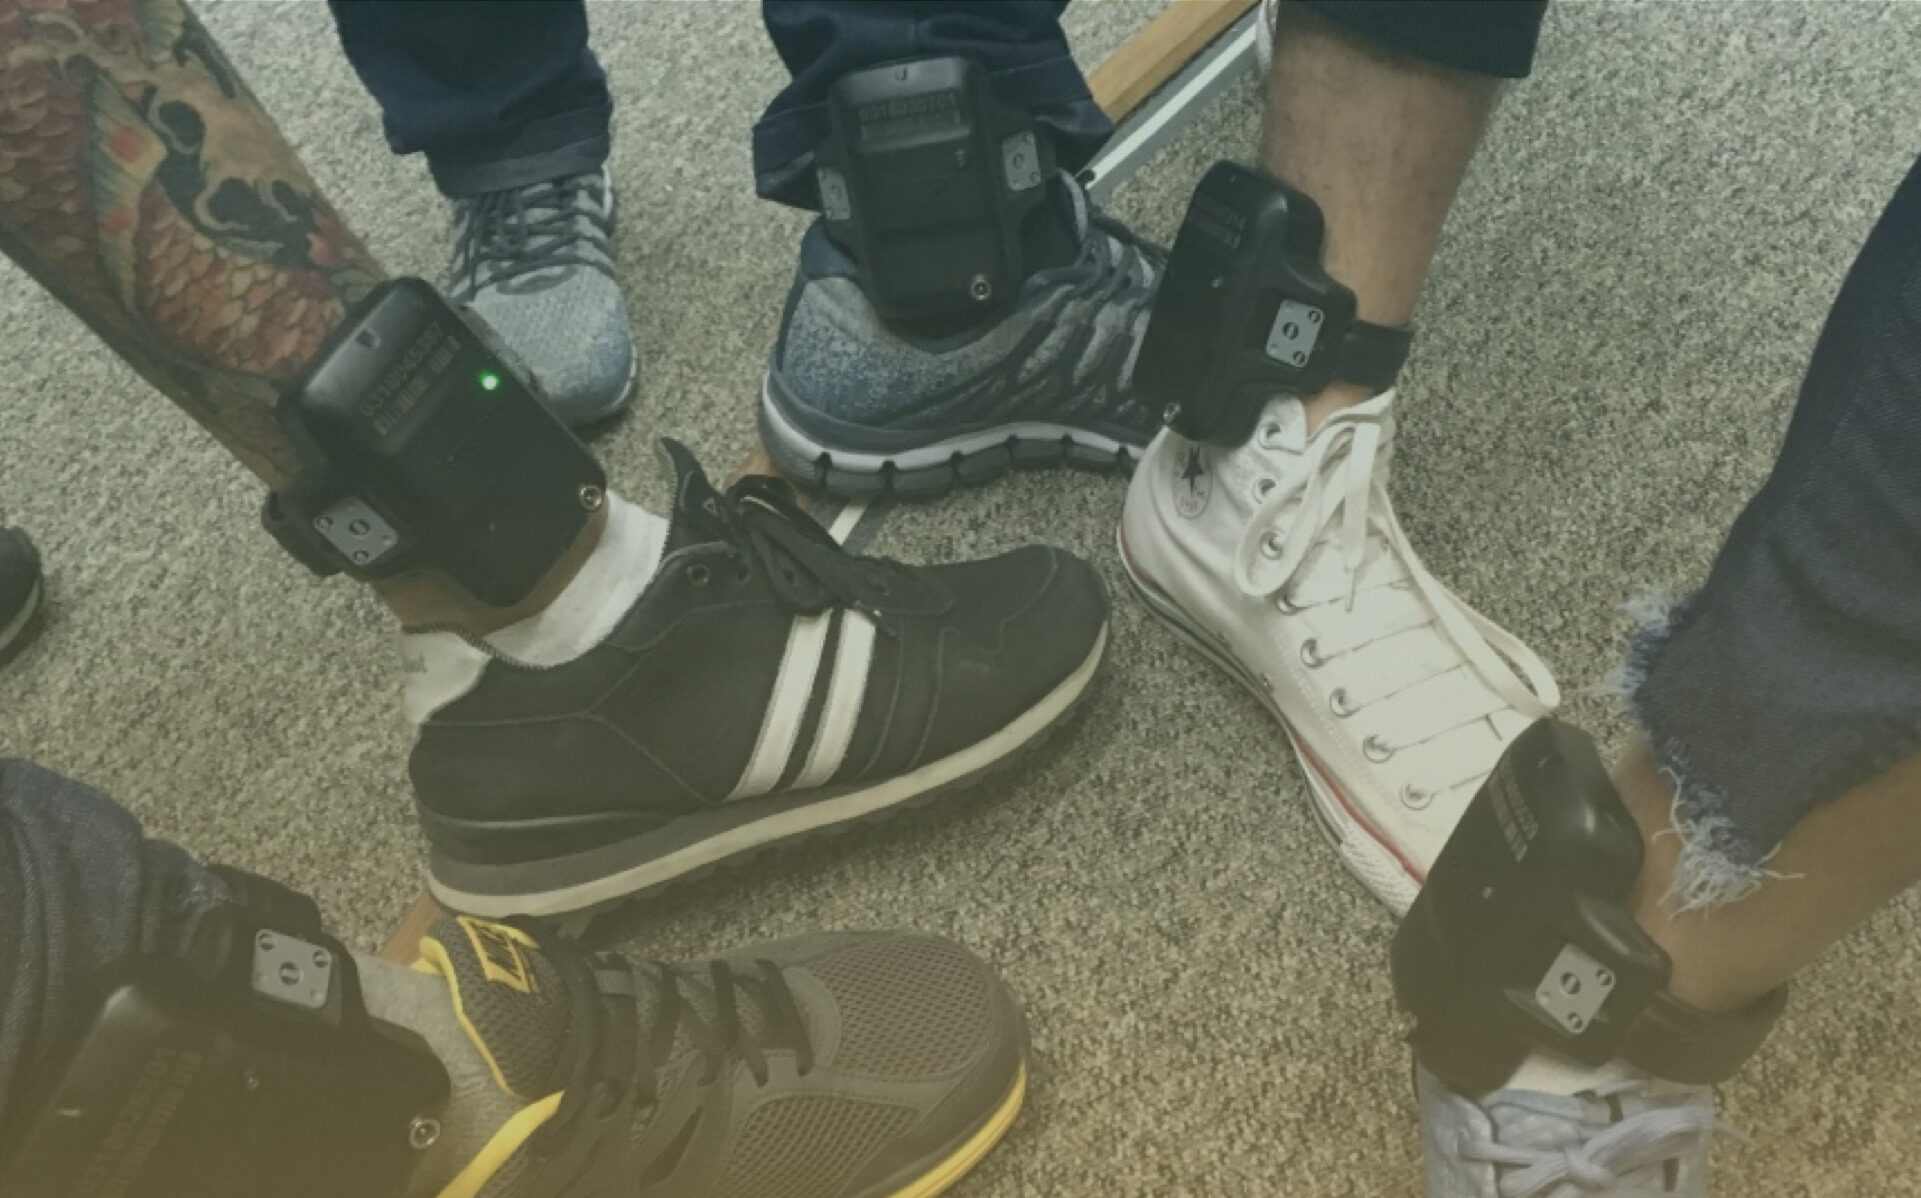 New Report Says Electronic Monitoring for Youth Sets Kids Up for Failure |